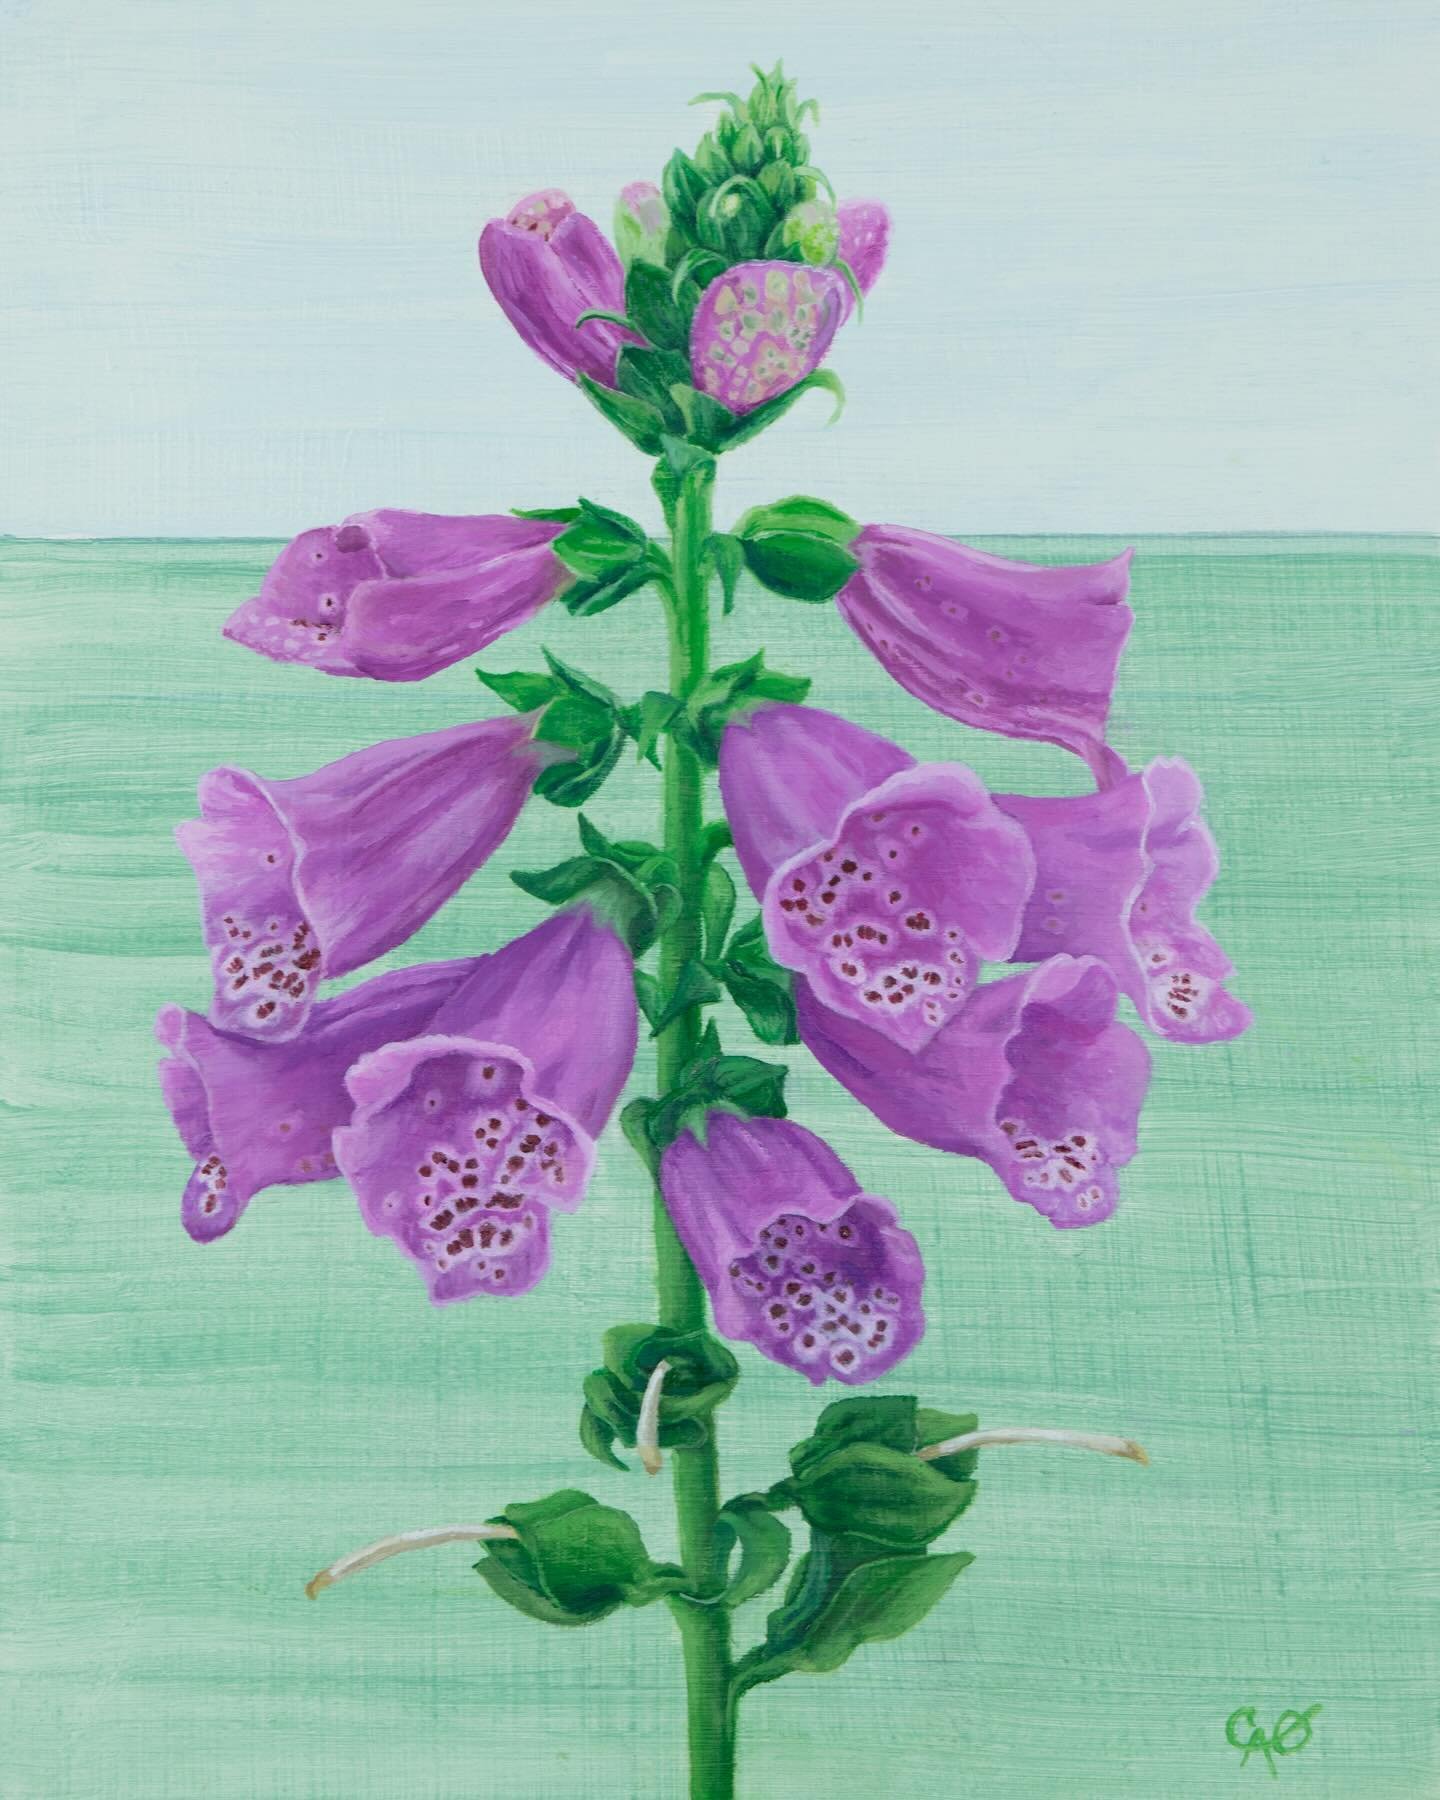 &ldquo;Candy Mountain Foxglove&rdquo;, oil on gesso paper, 10x8in. 🎨
These unique bell-shaped flowers have &ldquo;throats&rdquo; speckled with dark spots and attract hummingbirds. Foxgloves are also an important source of pollen for bees.
These uniq